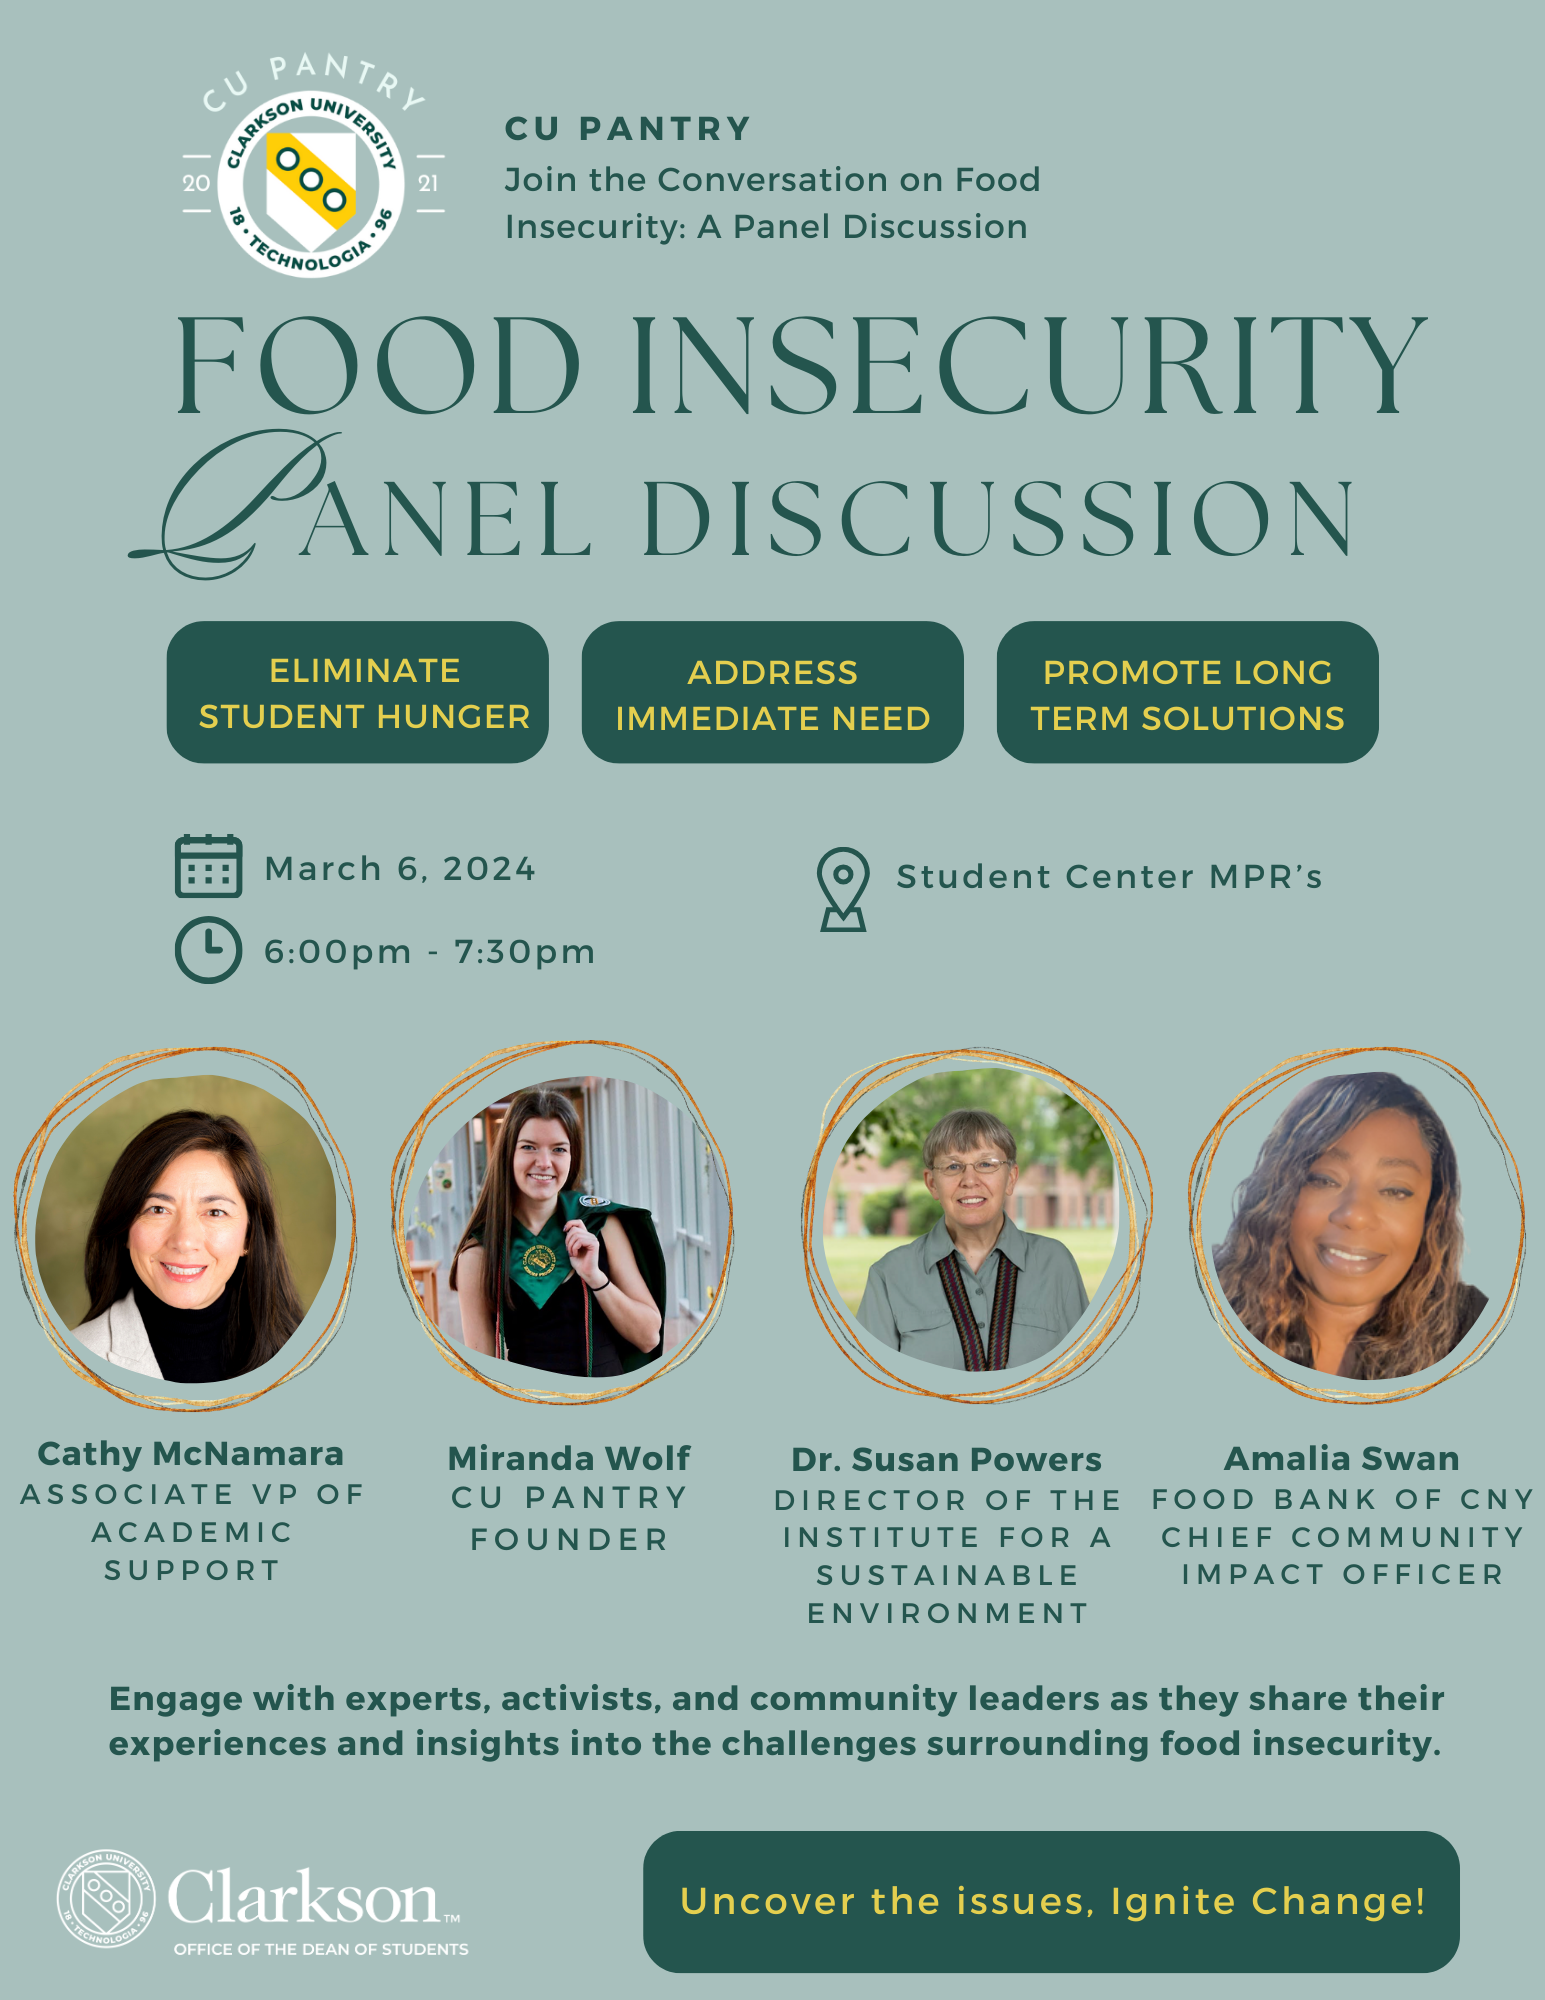 Panel Discussion on Food Insecurity